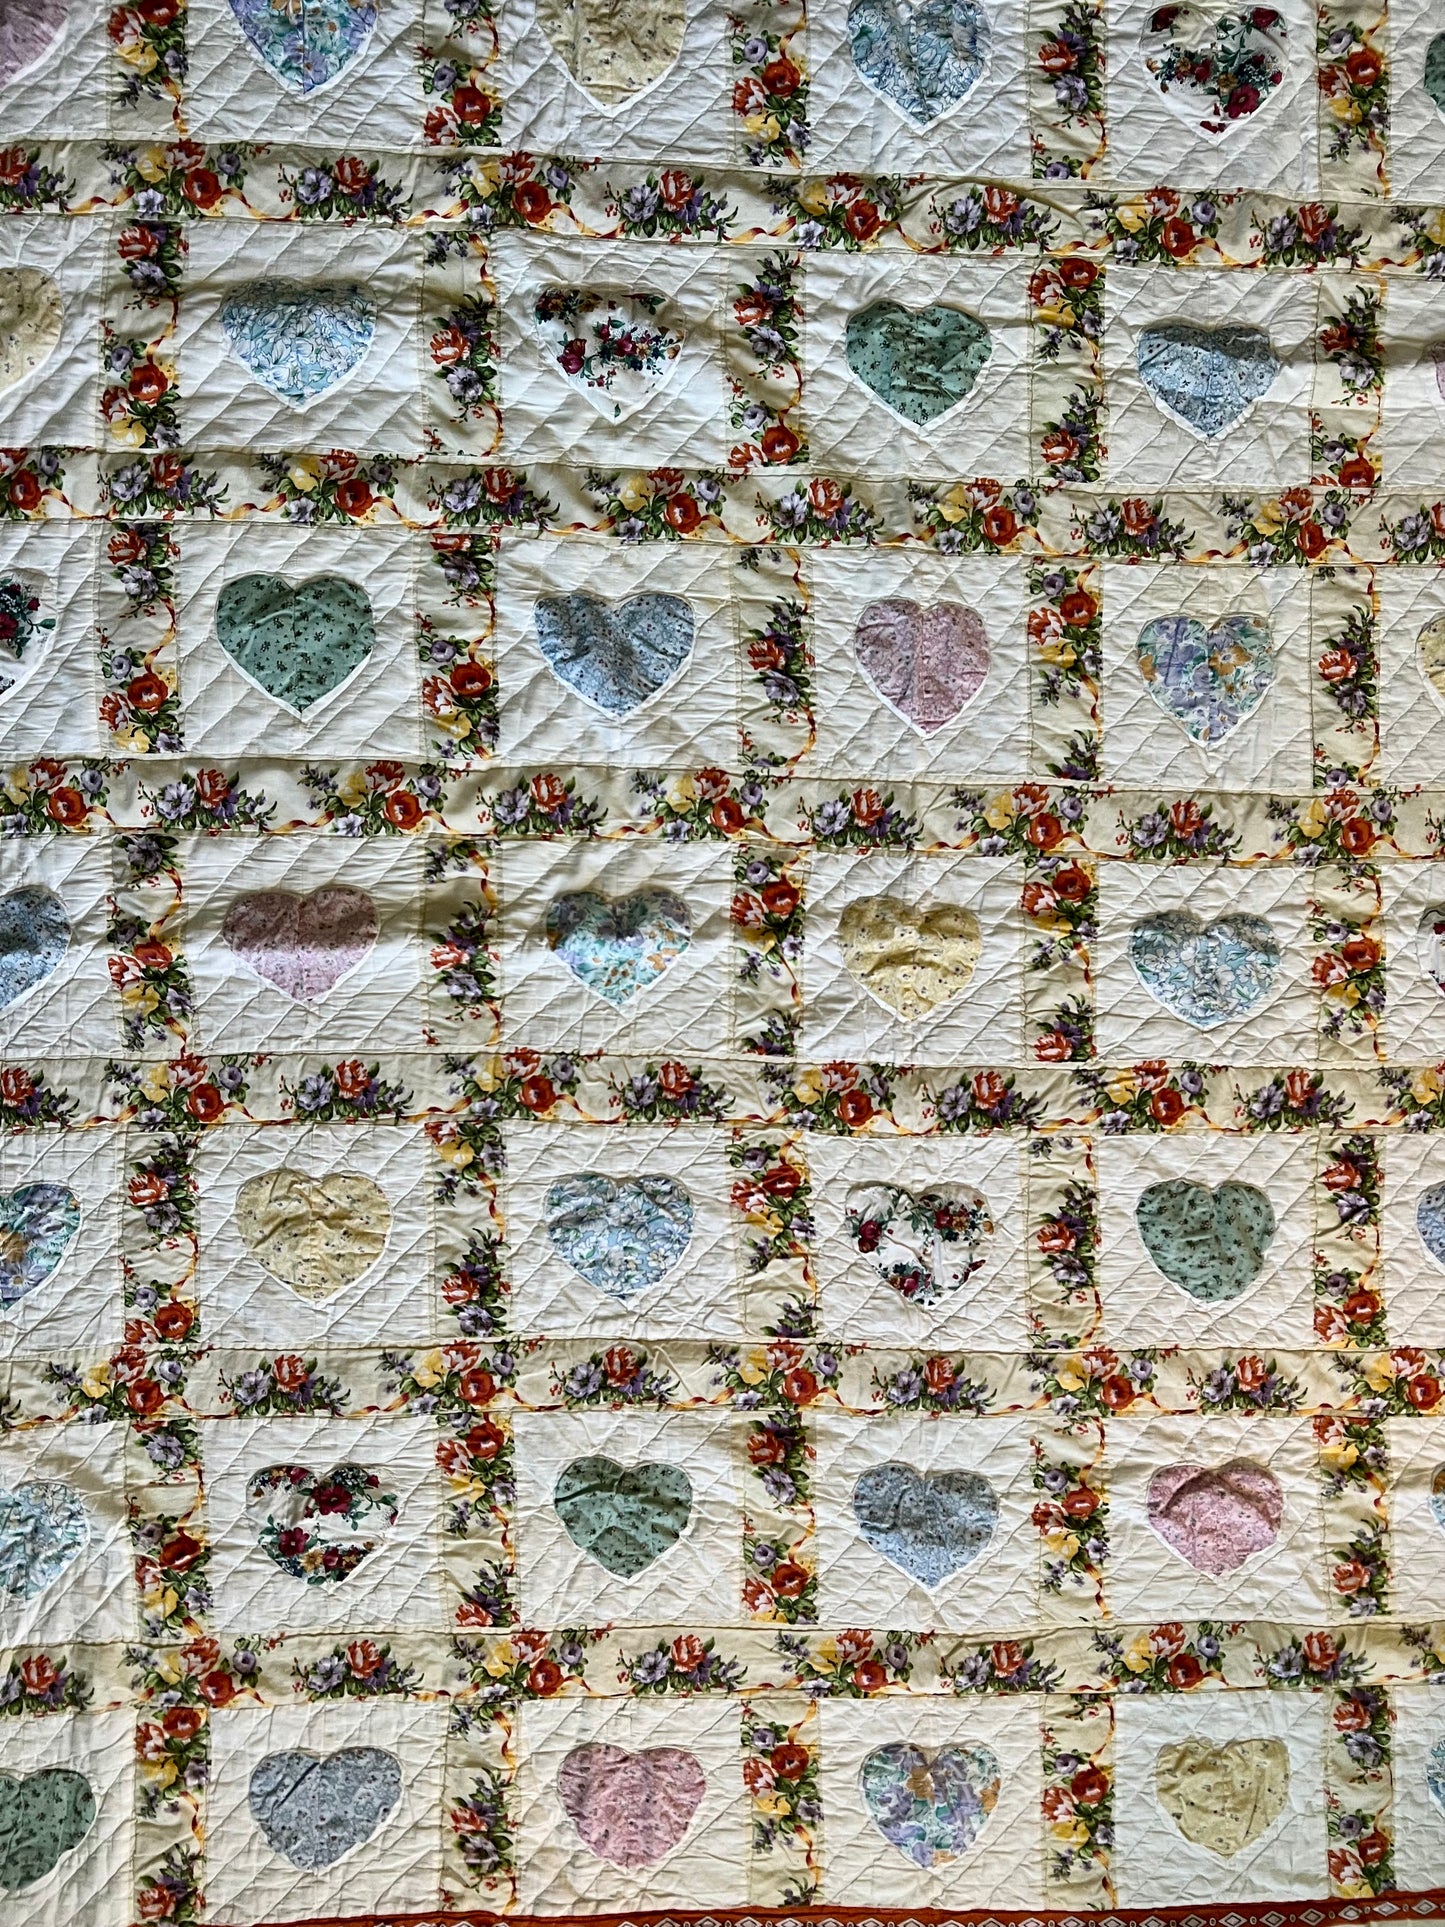 aerial view of the hearts in windowpanes quilt